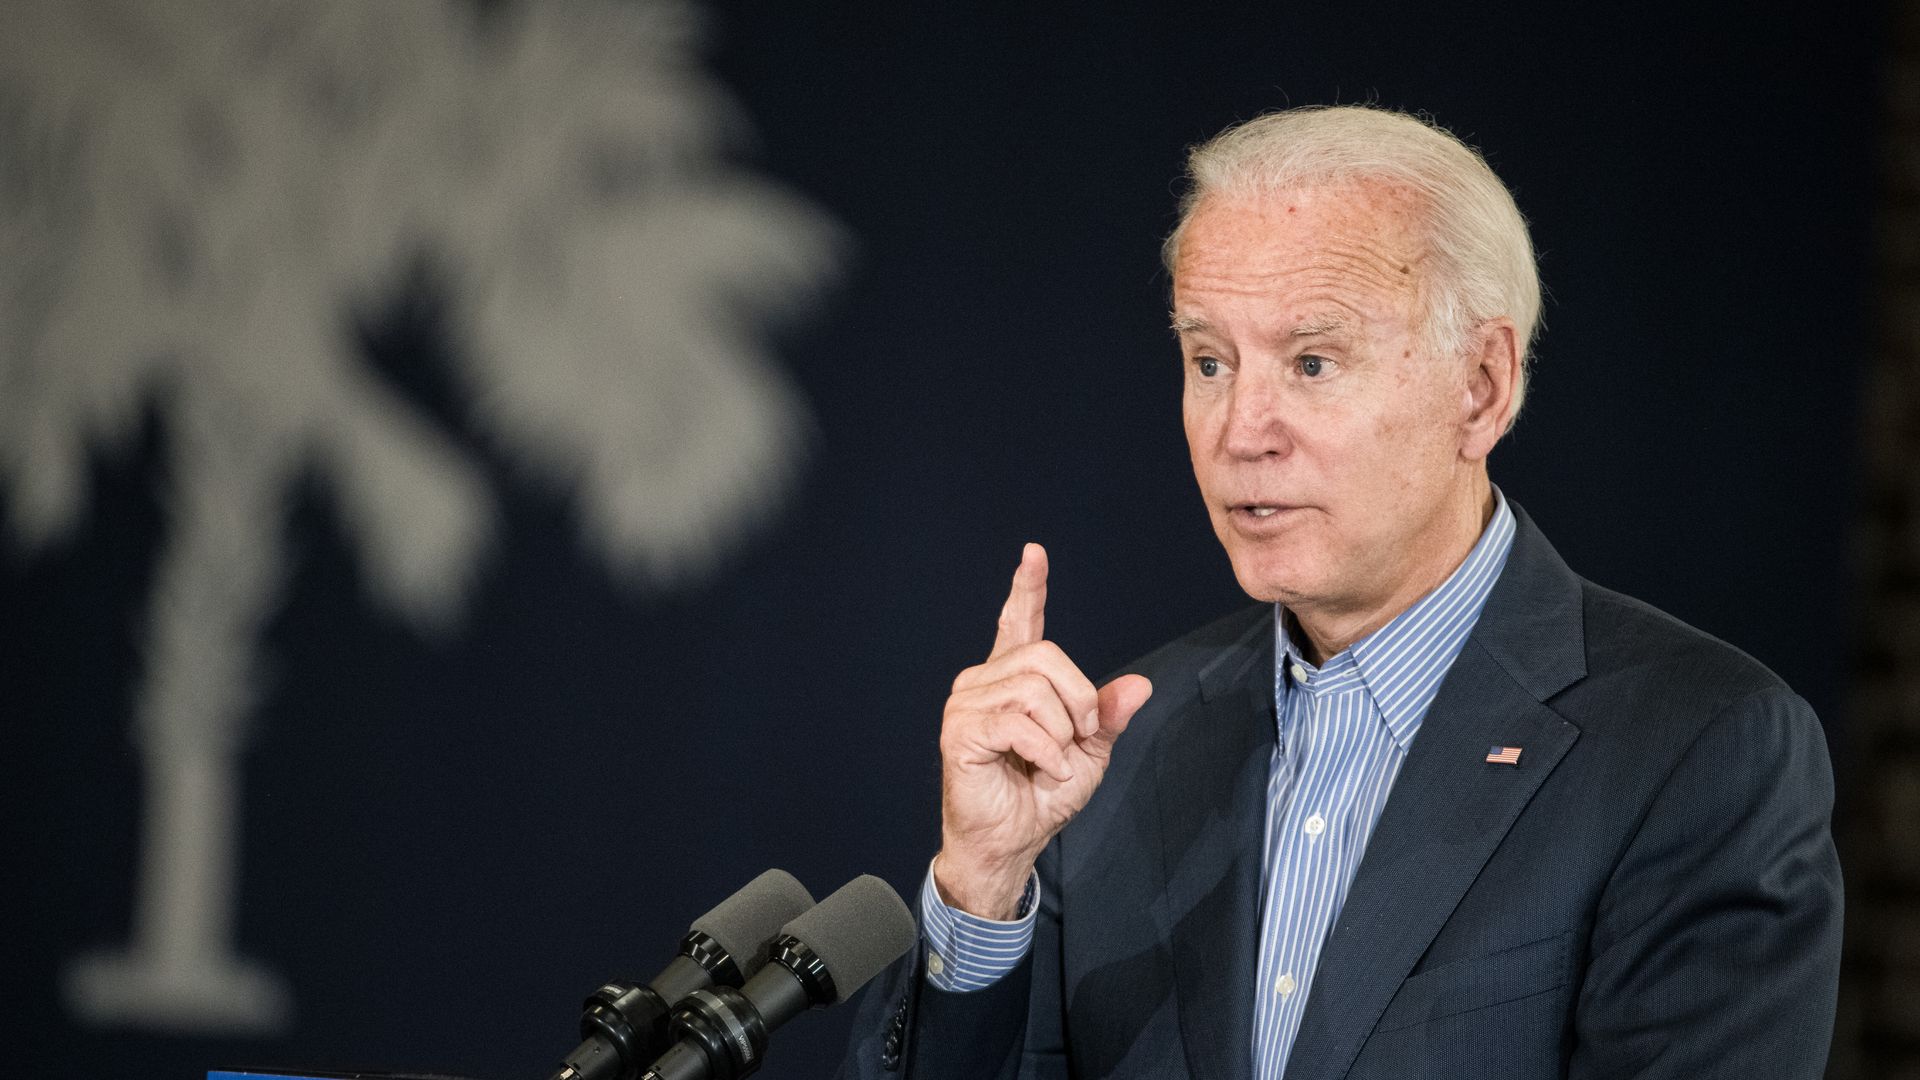  Democratic presidential candidate, former vice President Joe Biden addresses a crowd at Wilson High School on October 26, 2019 in Florence, South Carolina. 